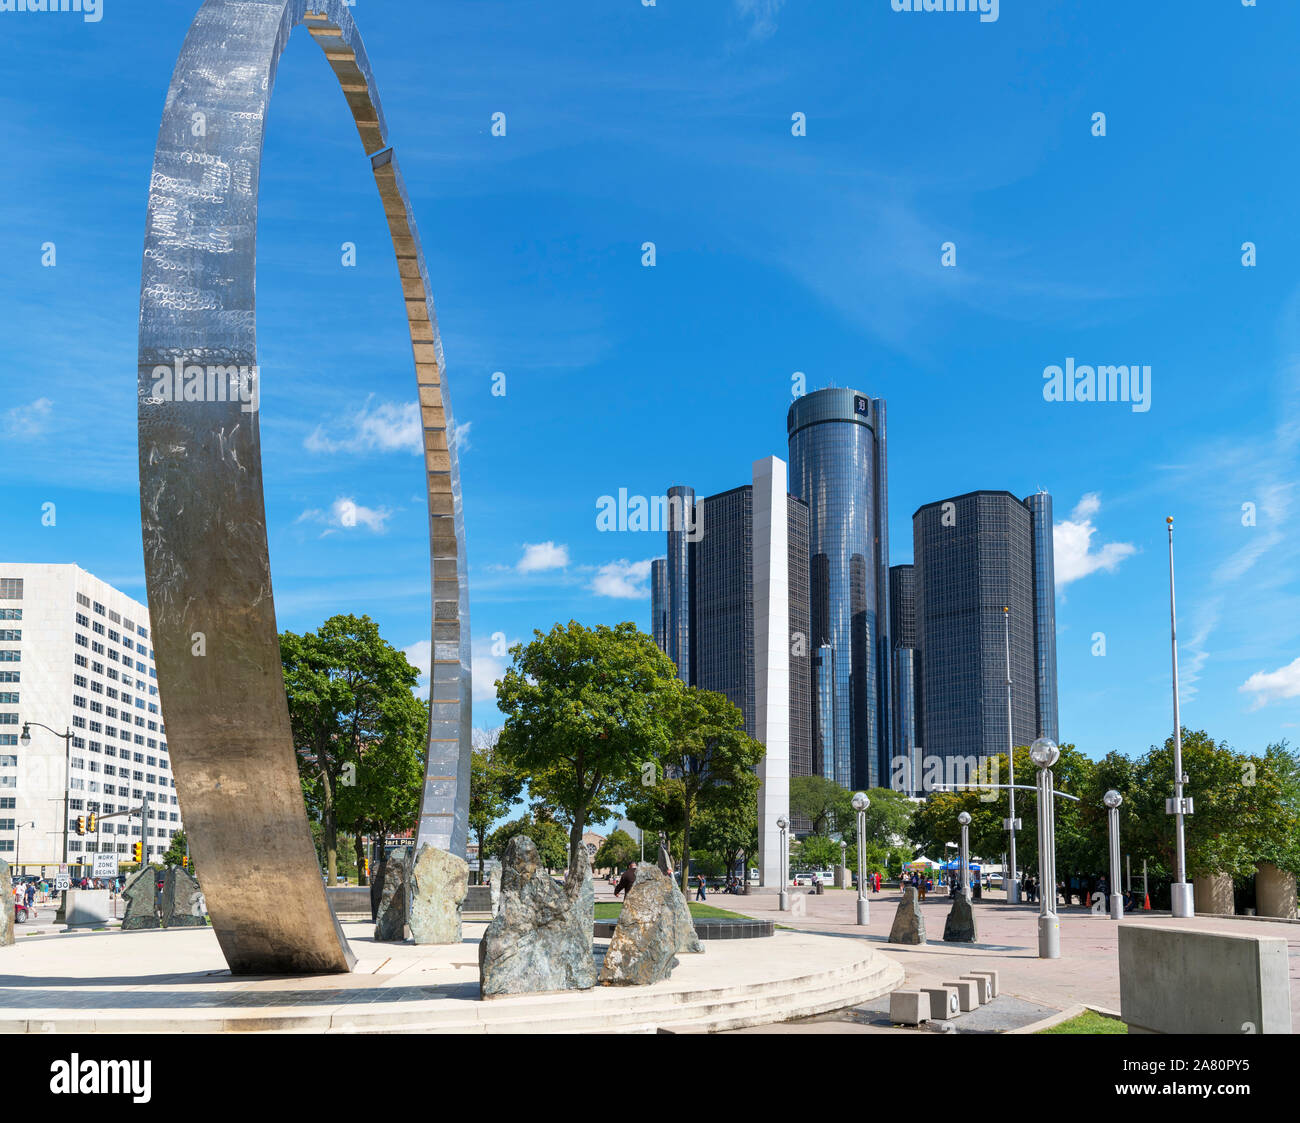 The skyline of the Renaissance Center viewed from Hart Plaza with the Transcending sculpture in the foreground, downtown Detroit, Michigan, USA Stock Photo